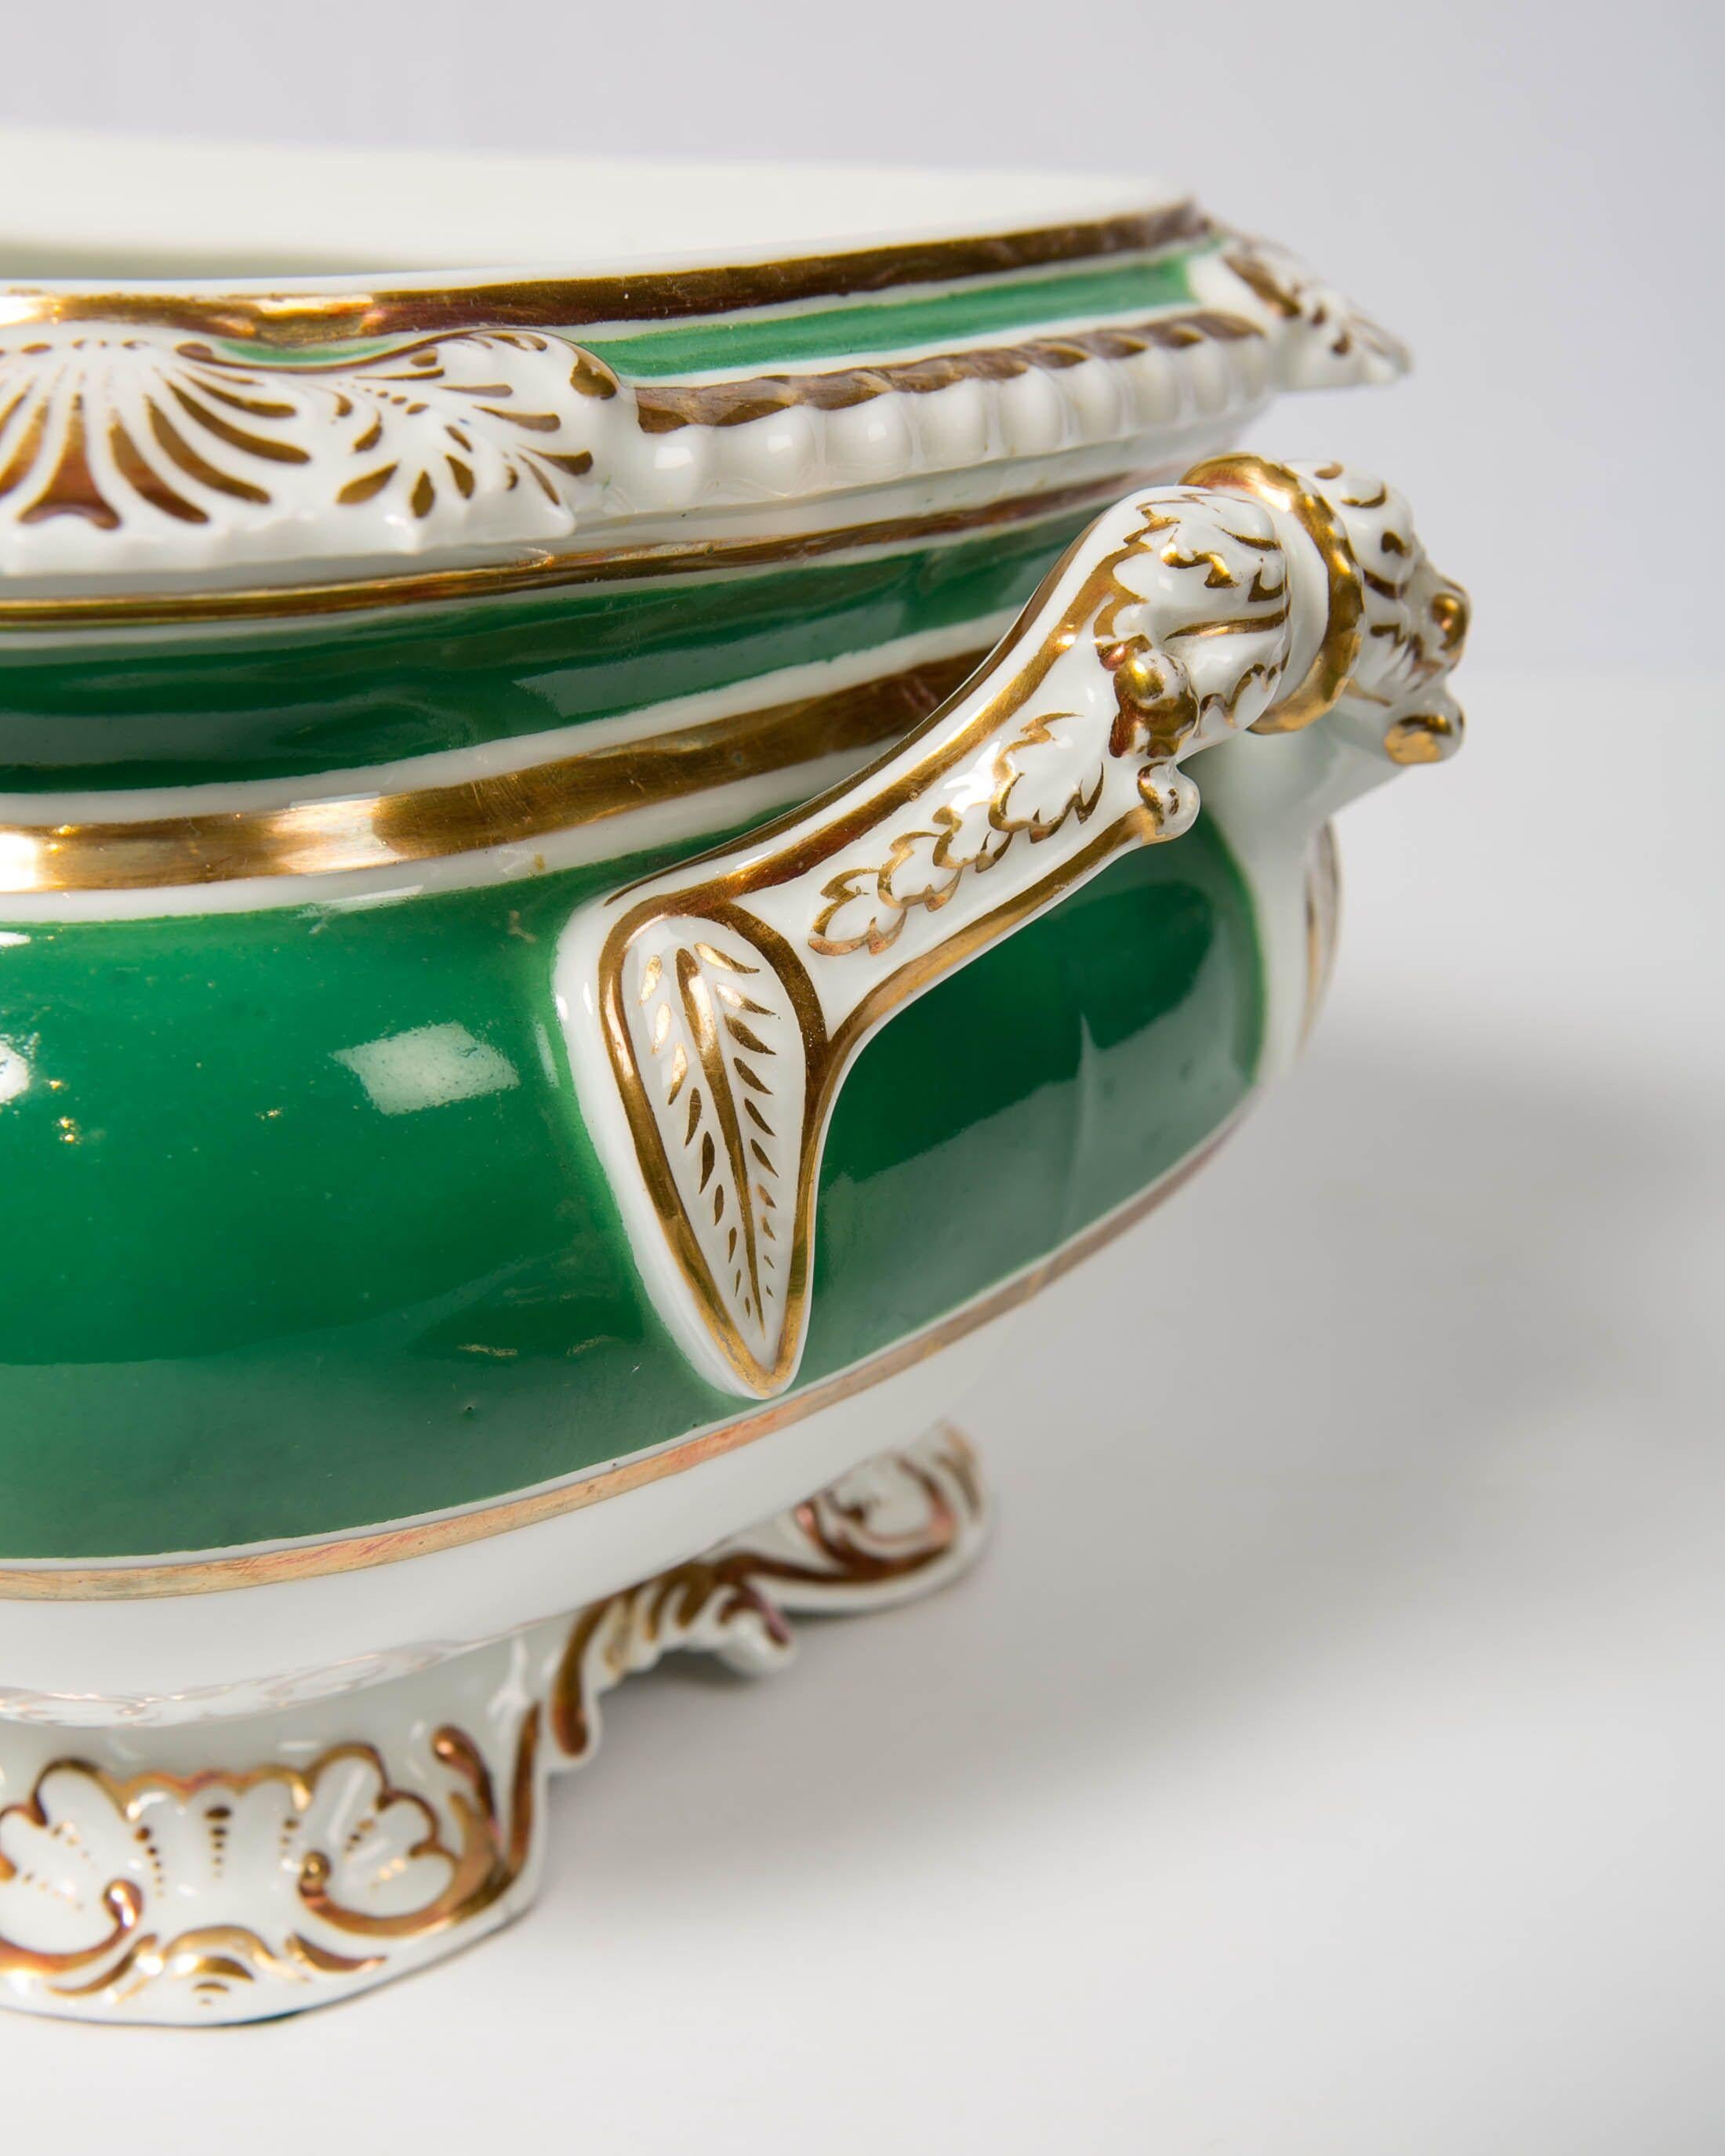 Chamberlains Worcester Green Soup Tureen Made in England, circa 1825 3